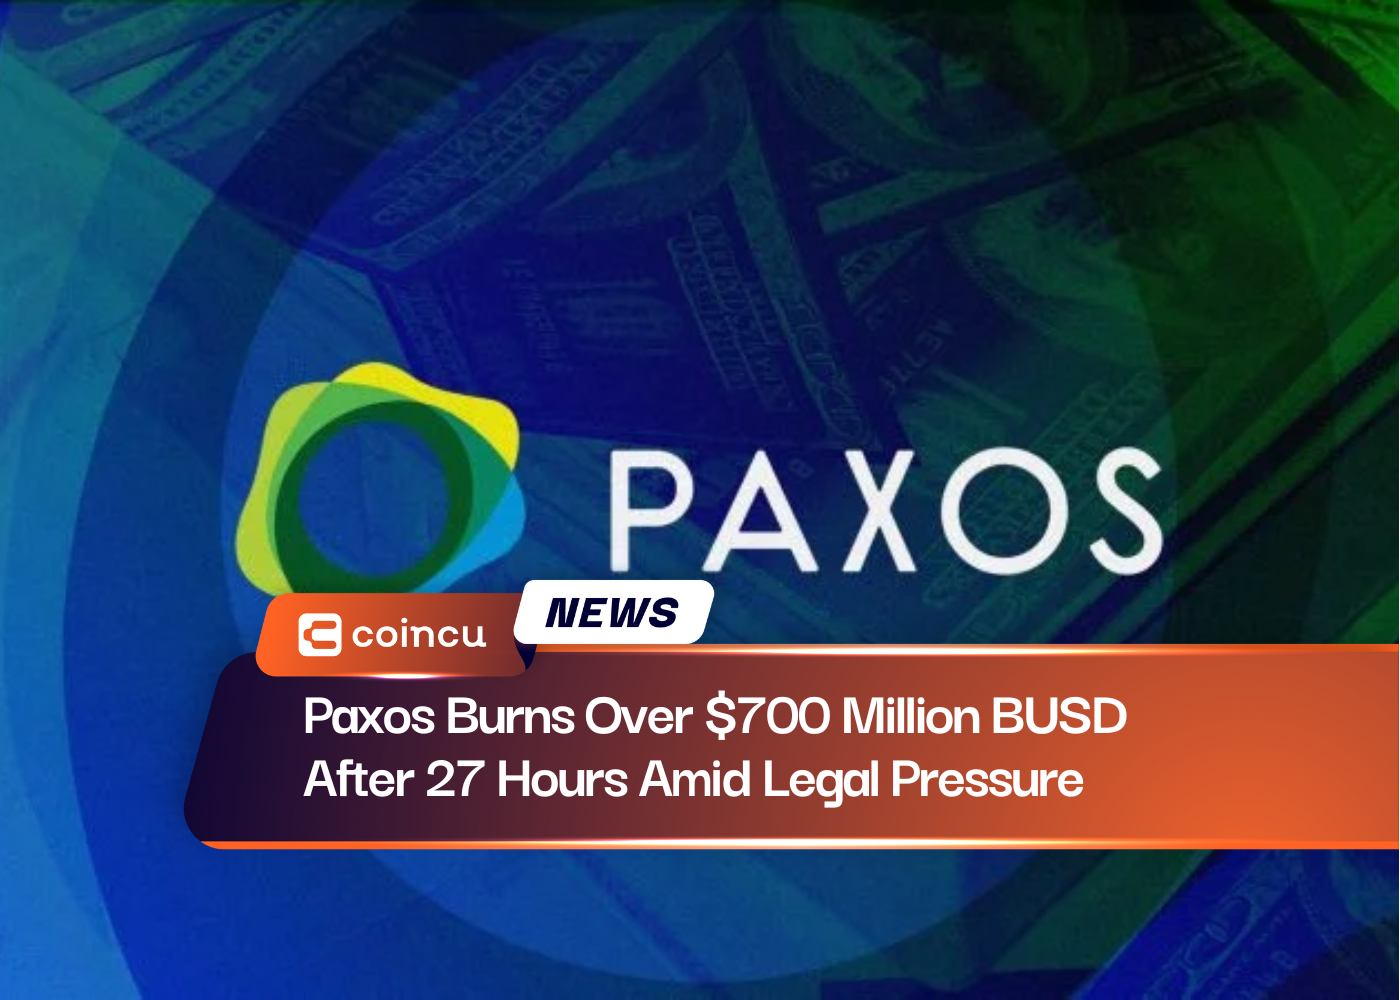 Paxos Burns Over $700 Million BUSD After 27 Hours Amid Legal Pressure